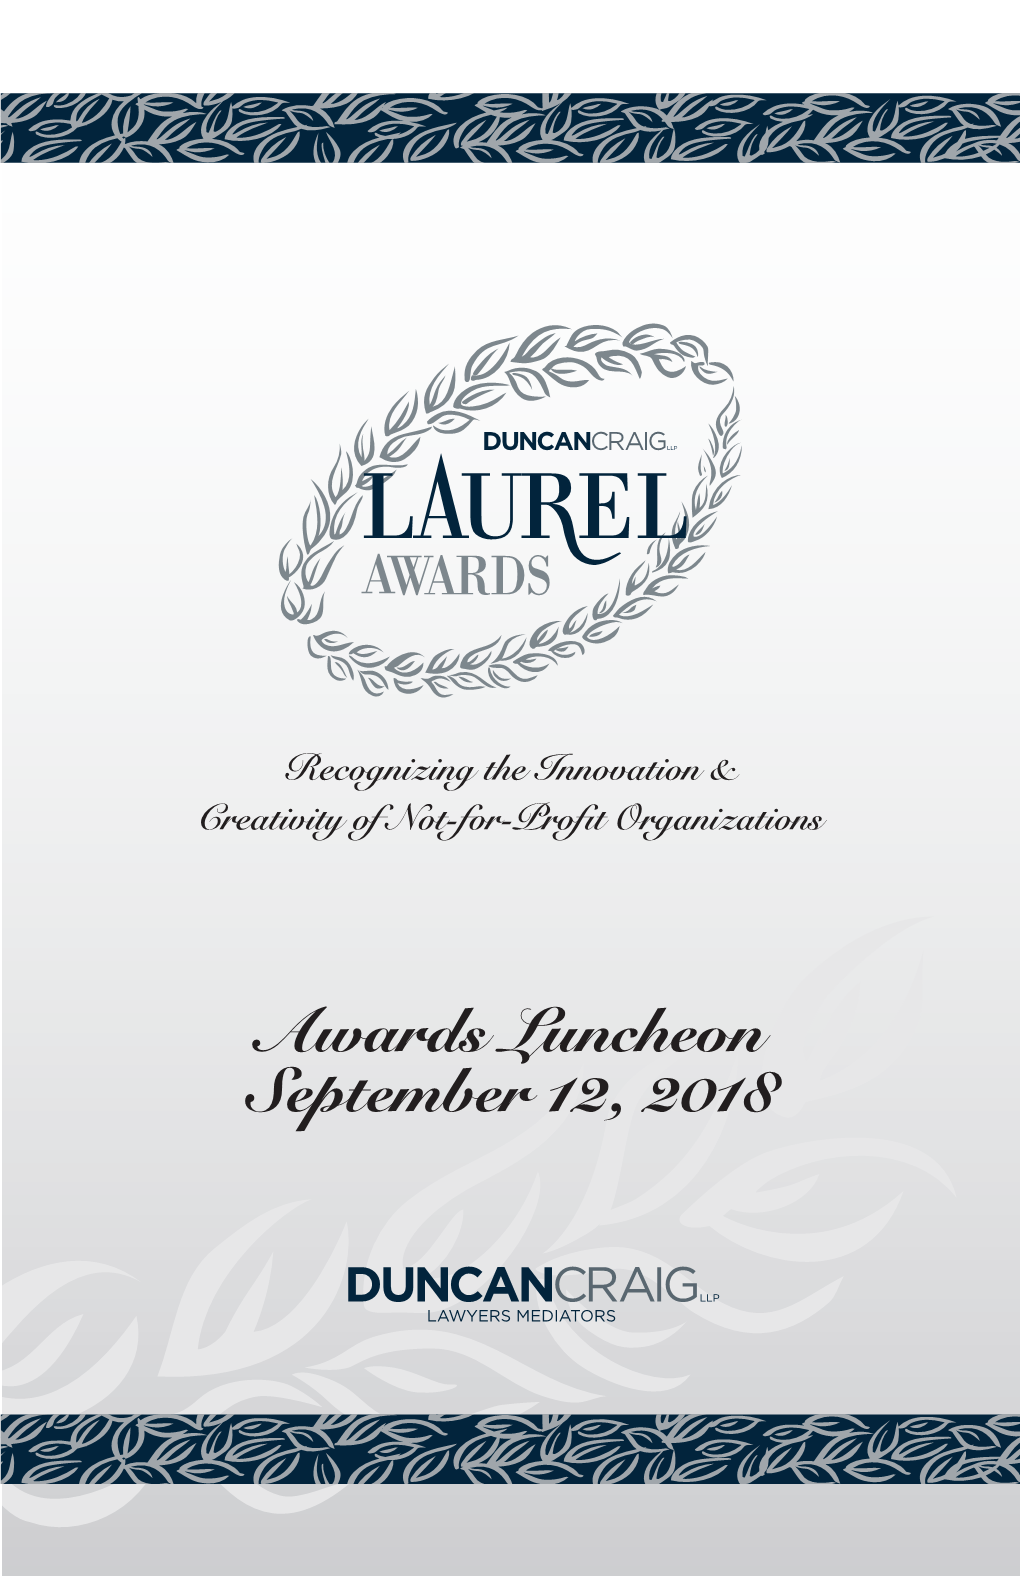 Awards Luncheon September 12, 2018 to Celebrate 100 Years of Continuous Legal Practice, Duncan Craig LLP Developed the Laurel Awards in 1994